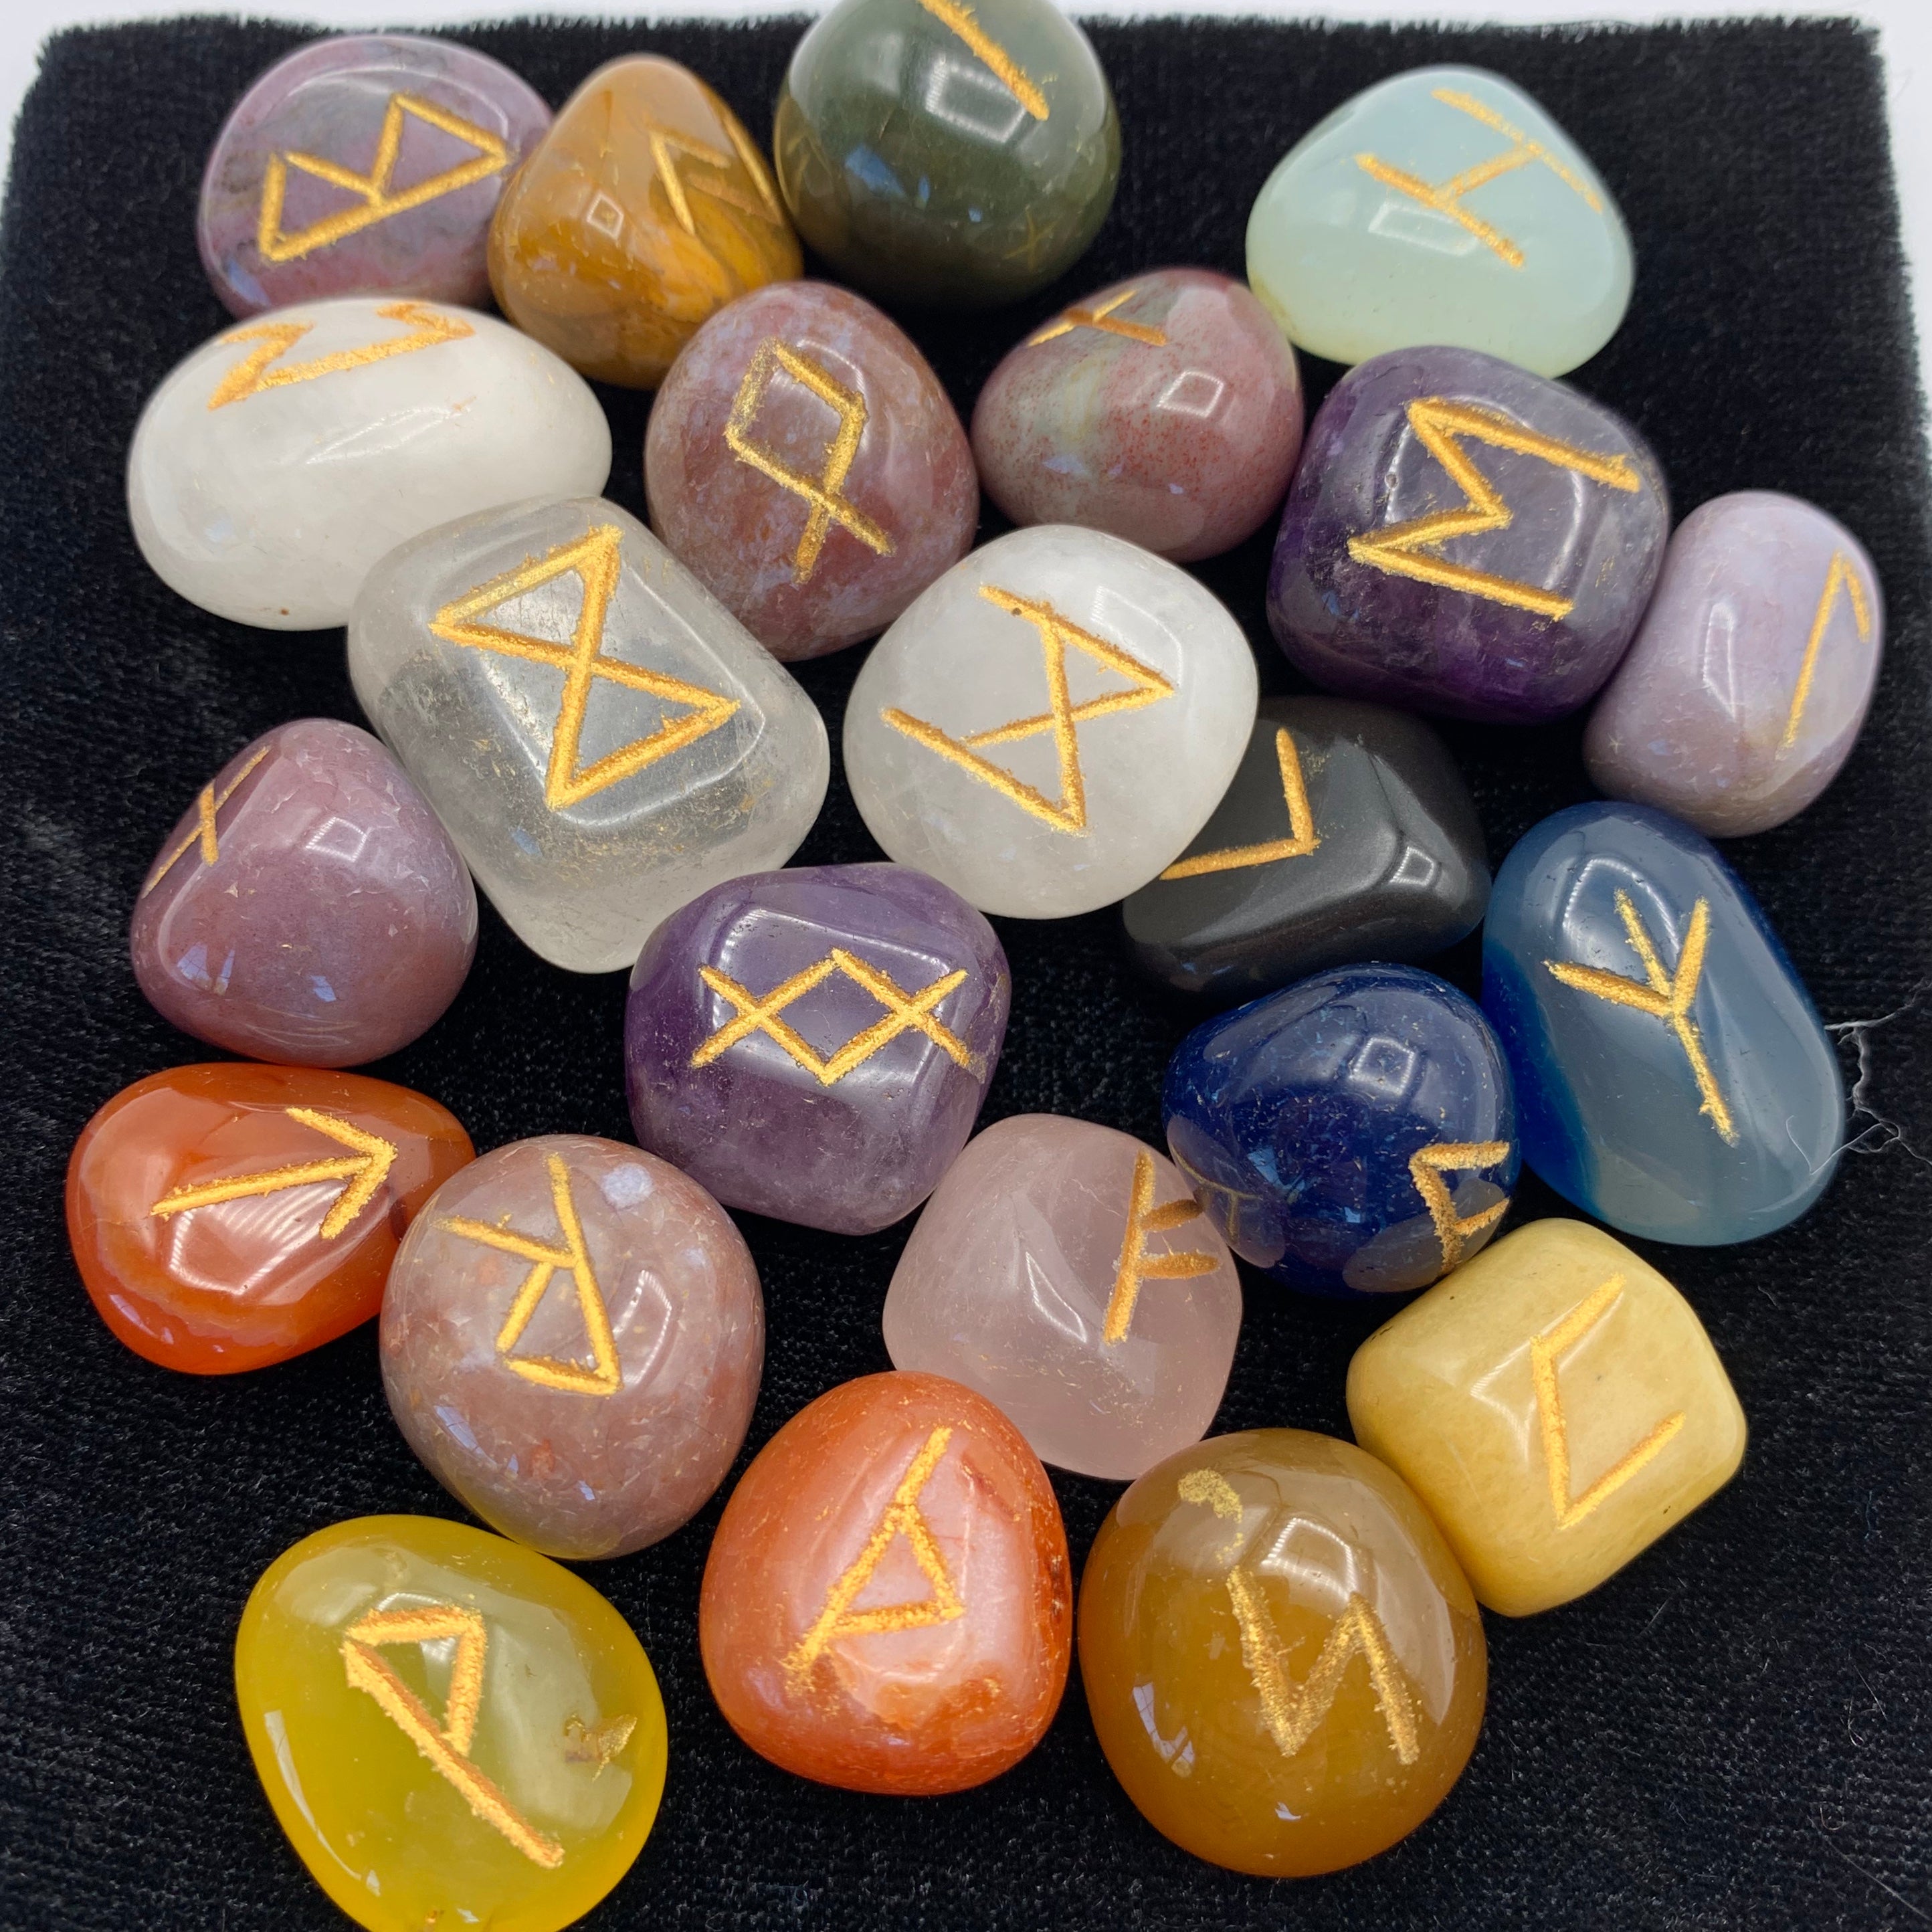 Close-up view of the mixed tumbled gemstone rune set with runic symbols on each stone in gold. Mixed tumbled stones means there will be a variety of gemstones, not just one type. There is no guarantee which stones will be included, but in this photo there are some amethyst, clear quartz, carnelian and more - very visually appealing. The runes come in a velvet bag with a paper sheet of rune meanings.